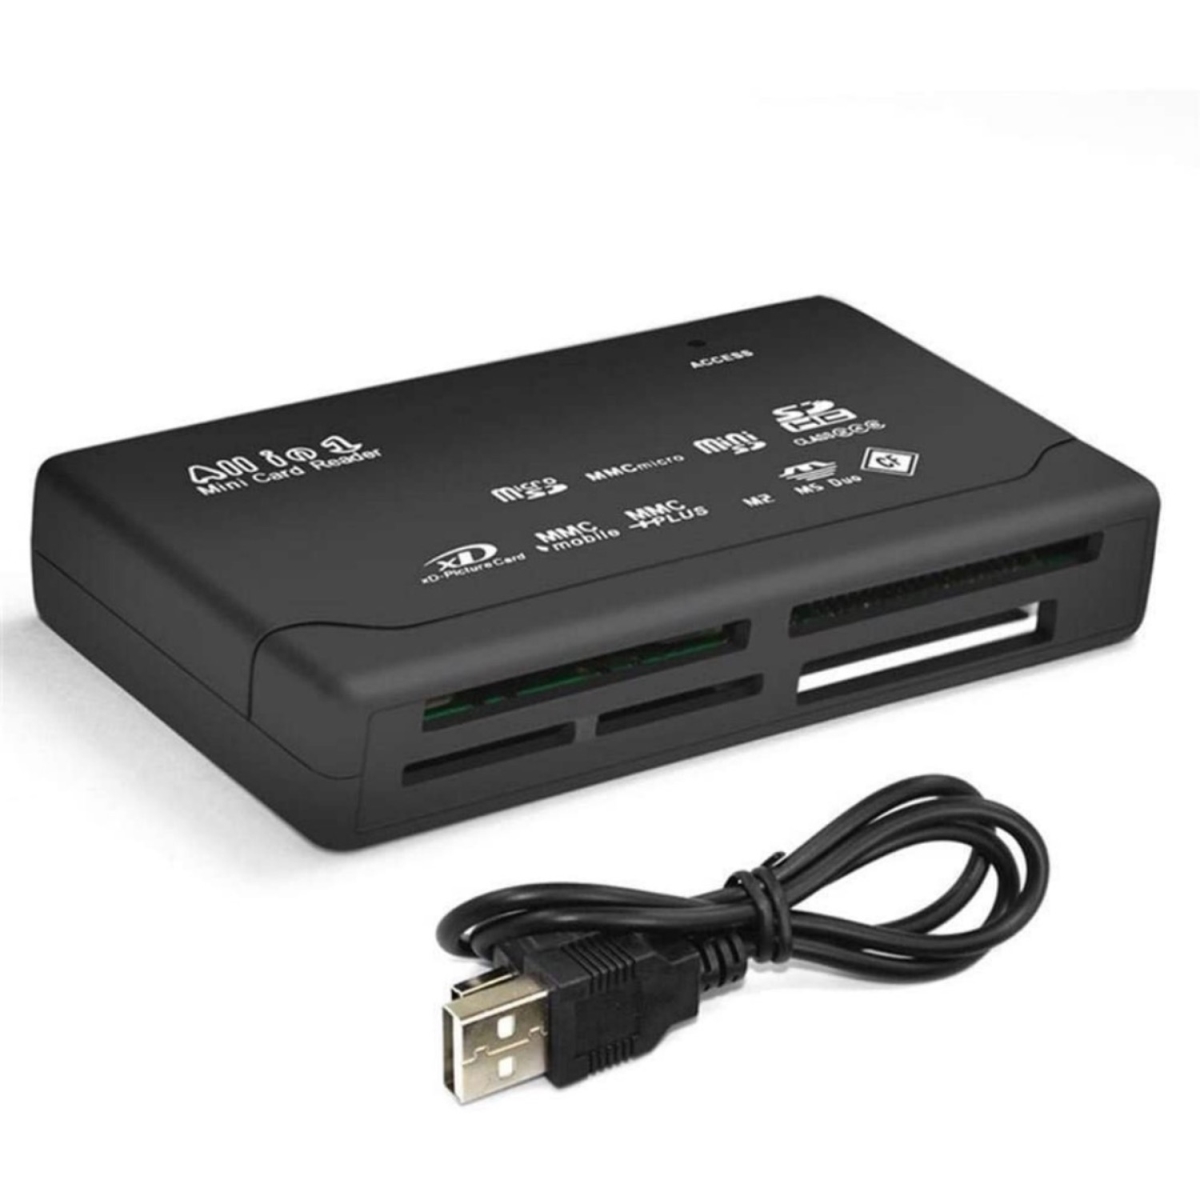 Picture of Sanoxy SANOXY-ALL1-memorycrd USB 2.0 All-in-1 CF xD SD MS SDHC Memory Card Reader